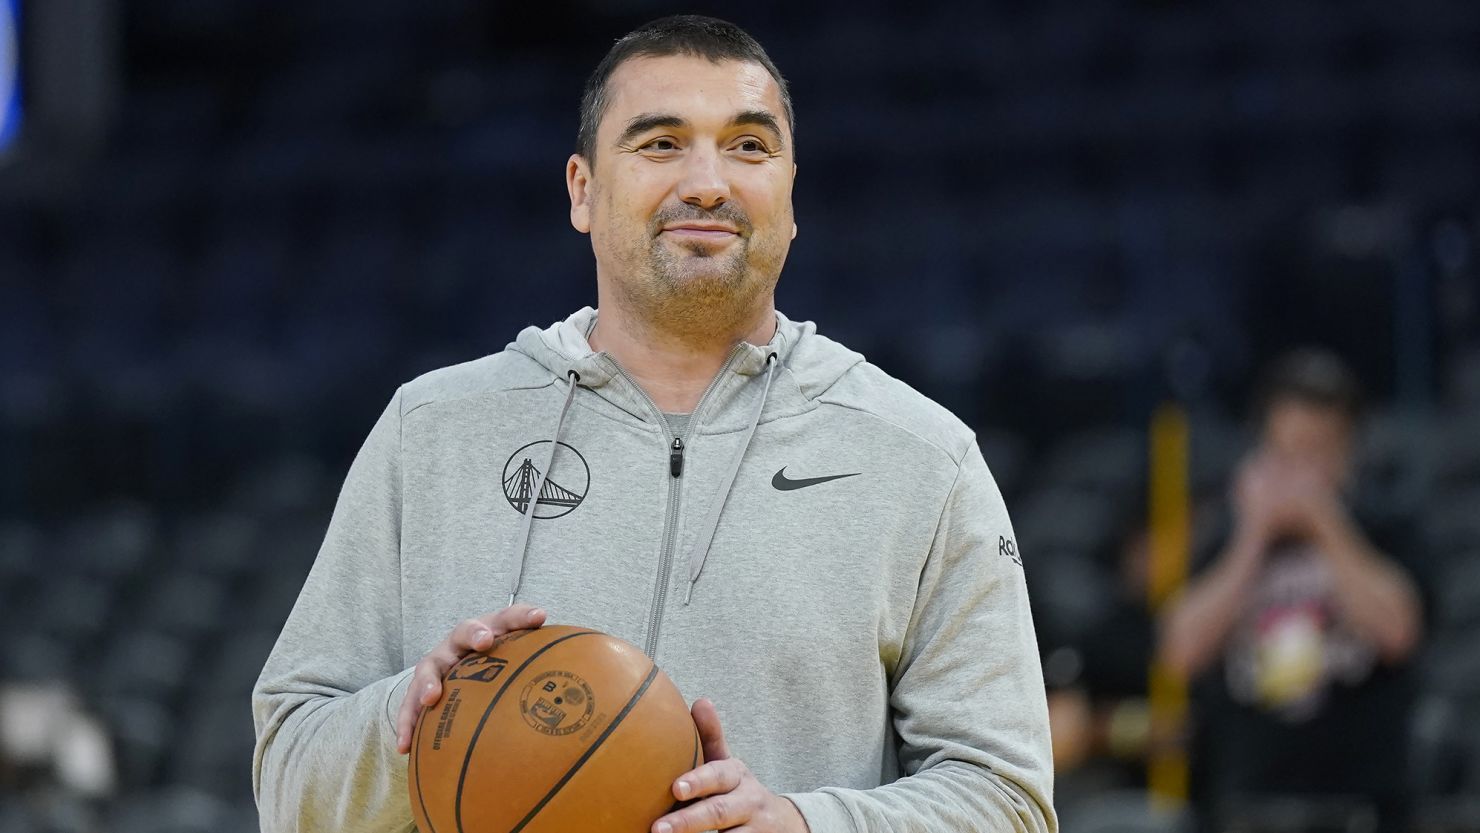 Remembering Dejan Milojević: The NBA and Warriors Mourn the Loss of a Beloved Coach